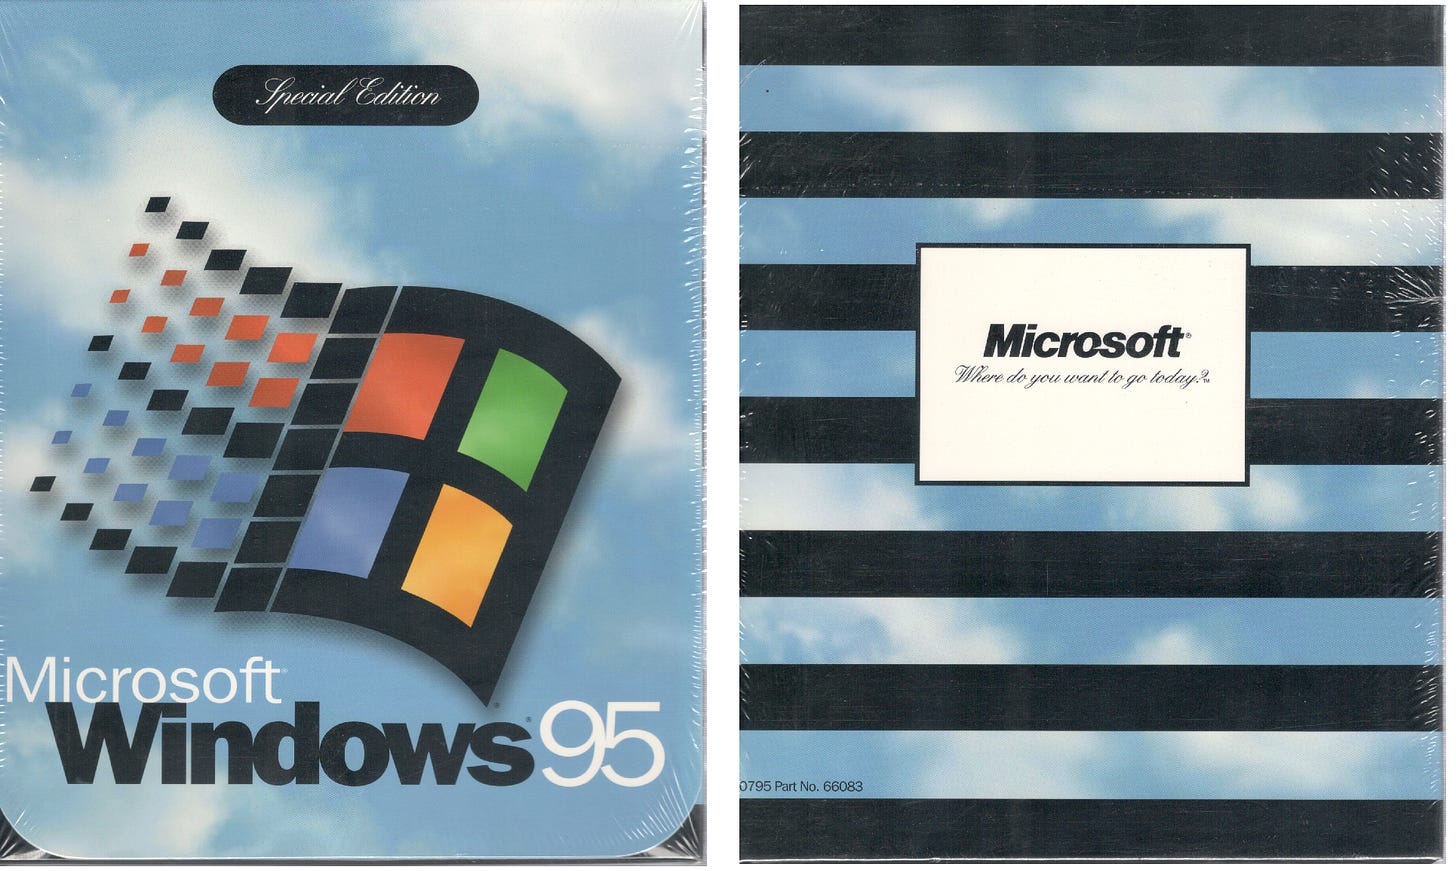 Windows 95 software box. "Special Edition"